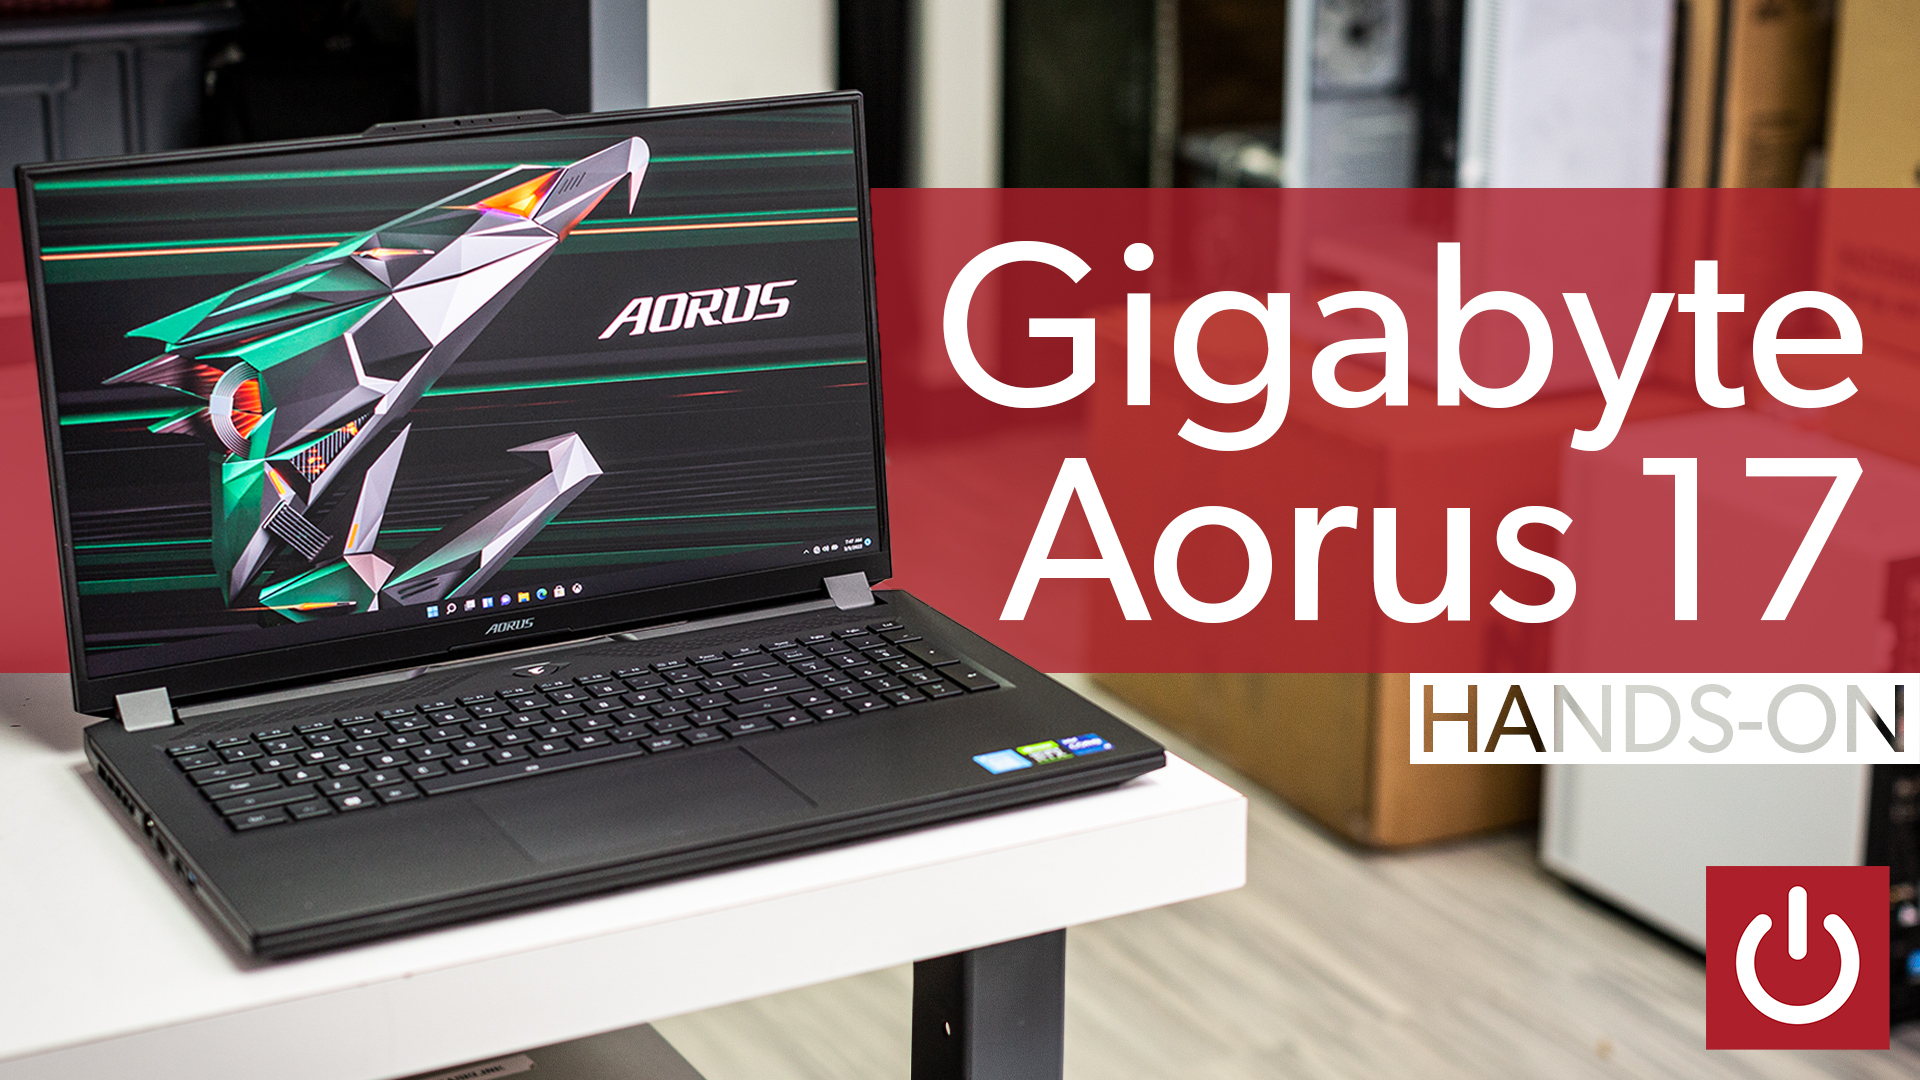 Gigabyte’s Aorus 17 gaming computer is ready for a road time out